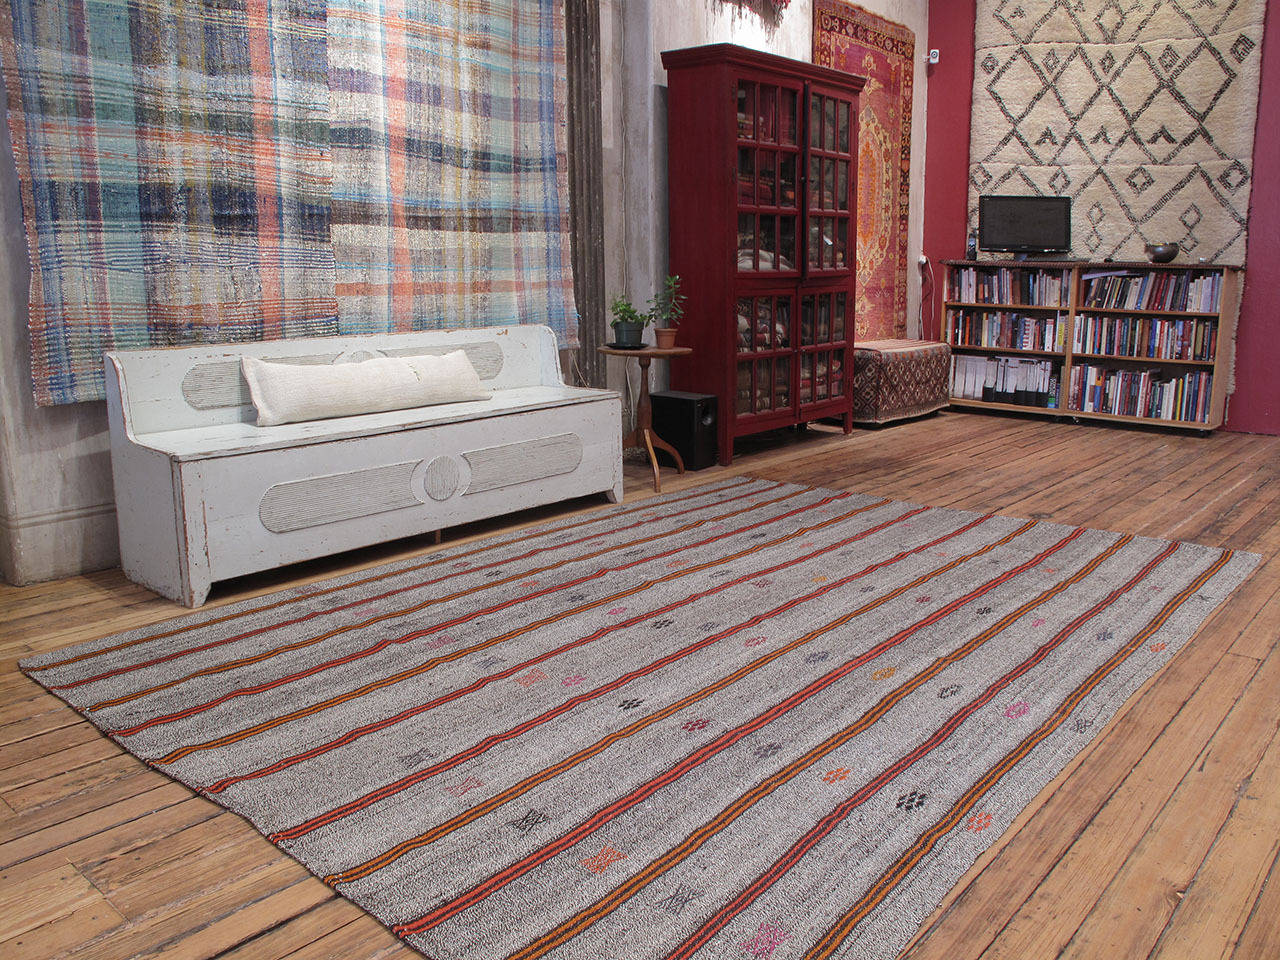 An old tribal flat-weave from Southeastern Turkey, woven with a mixture of goat hair and cotton, embellished with brightly colored stripes and brocaded motifs. Pretty fancy for a humble floor cover.